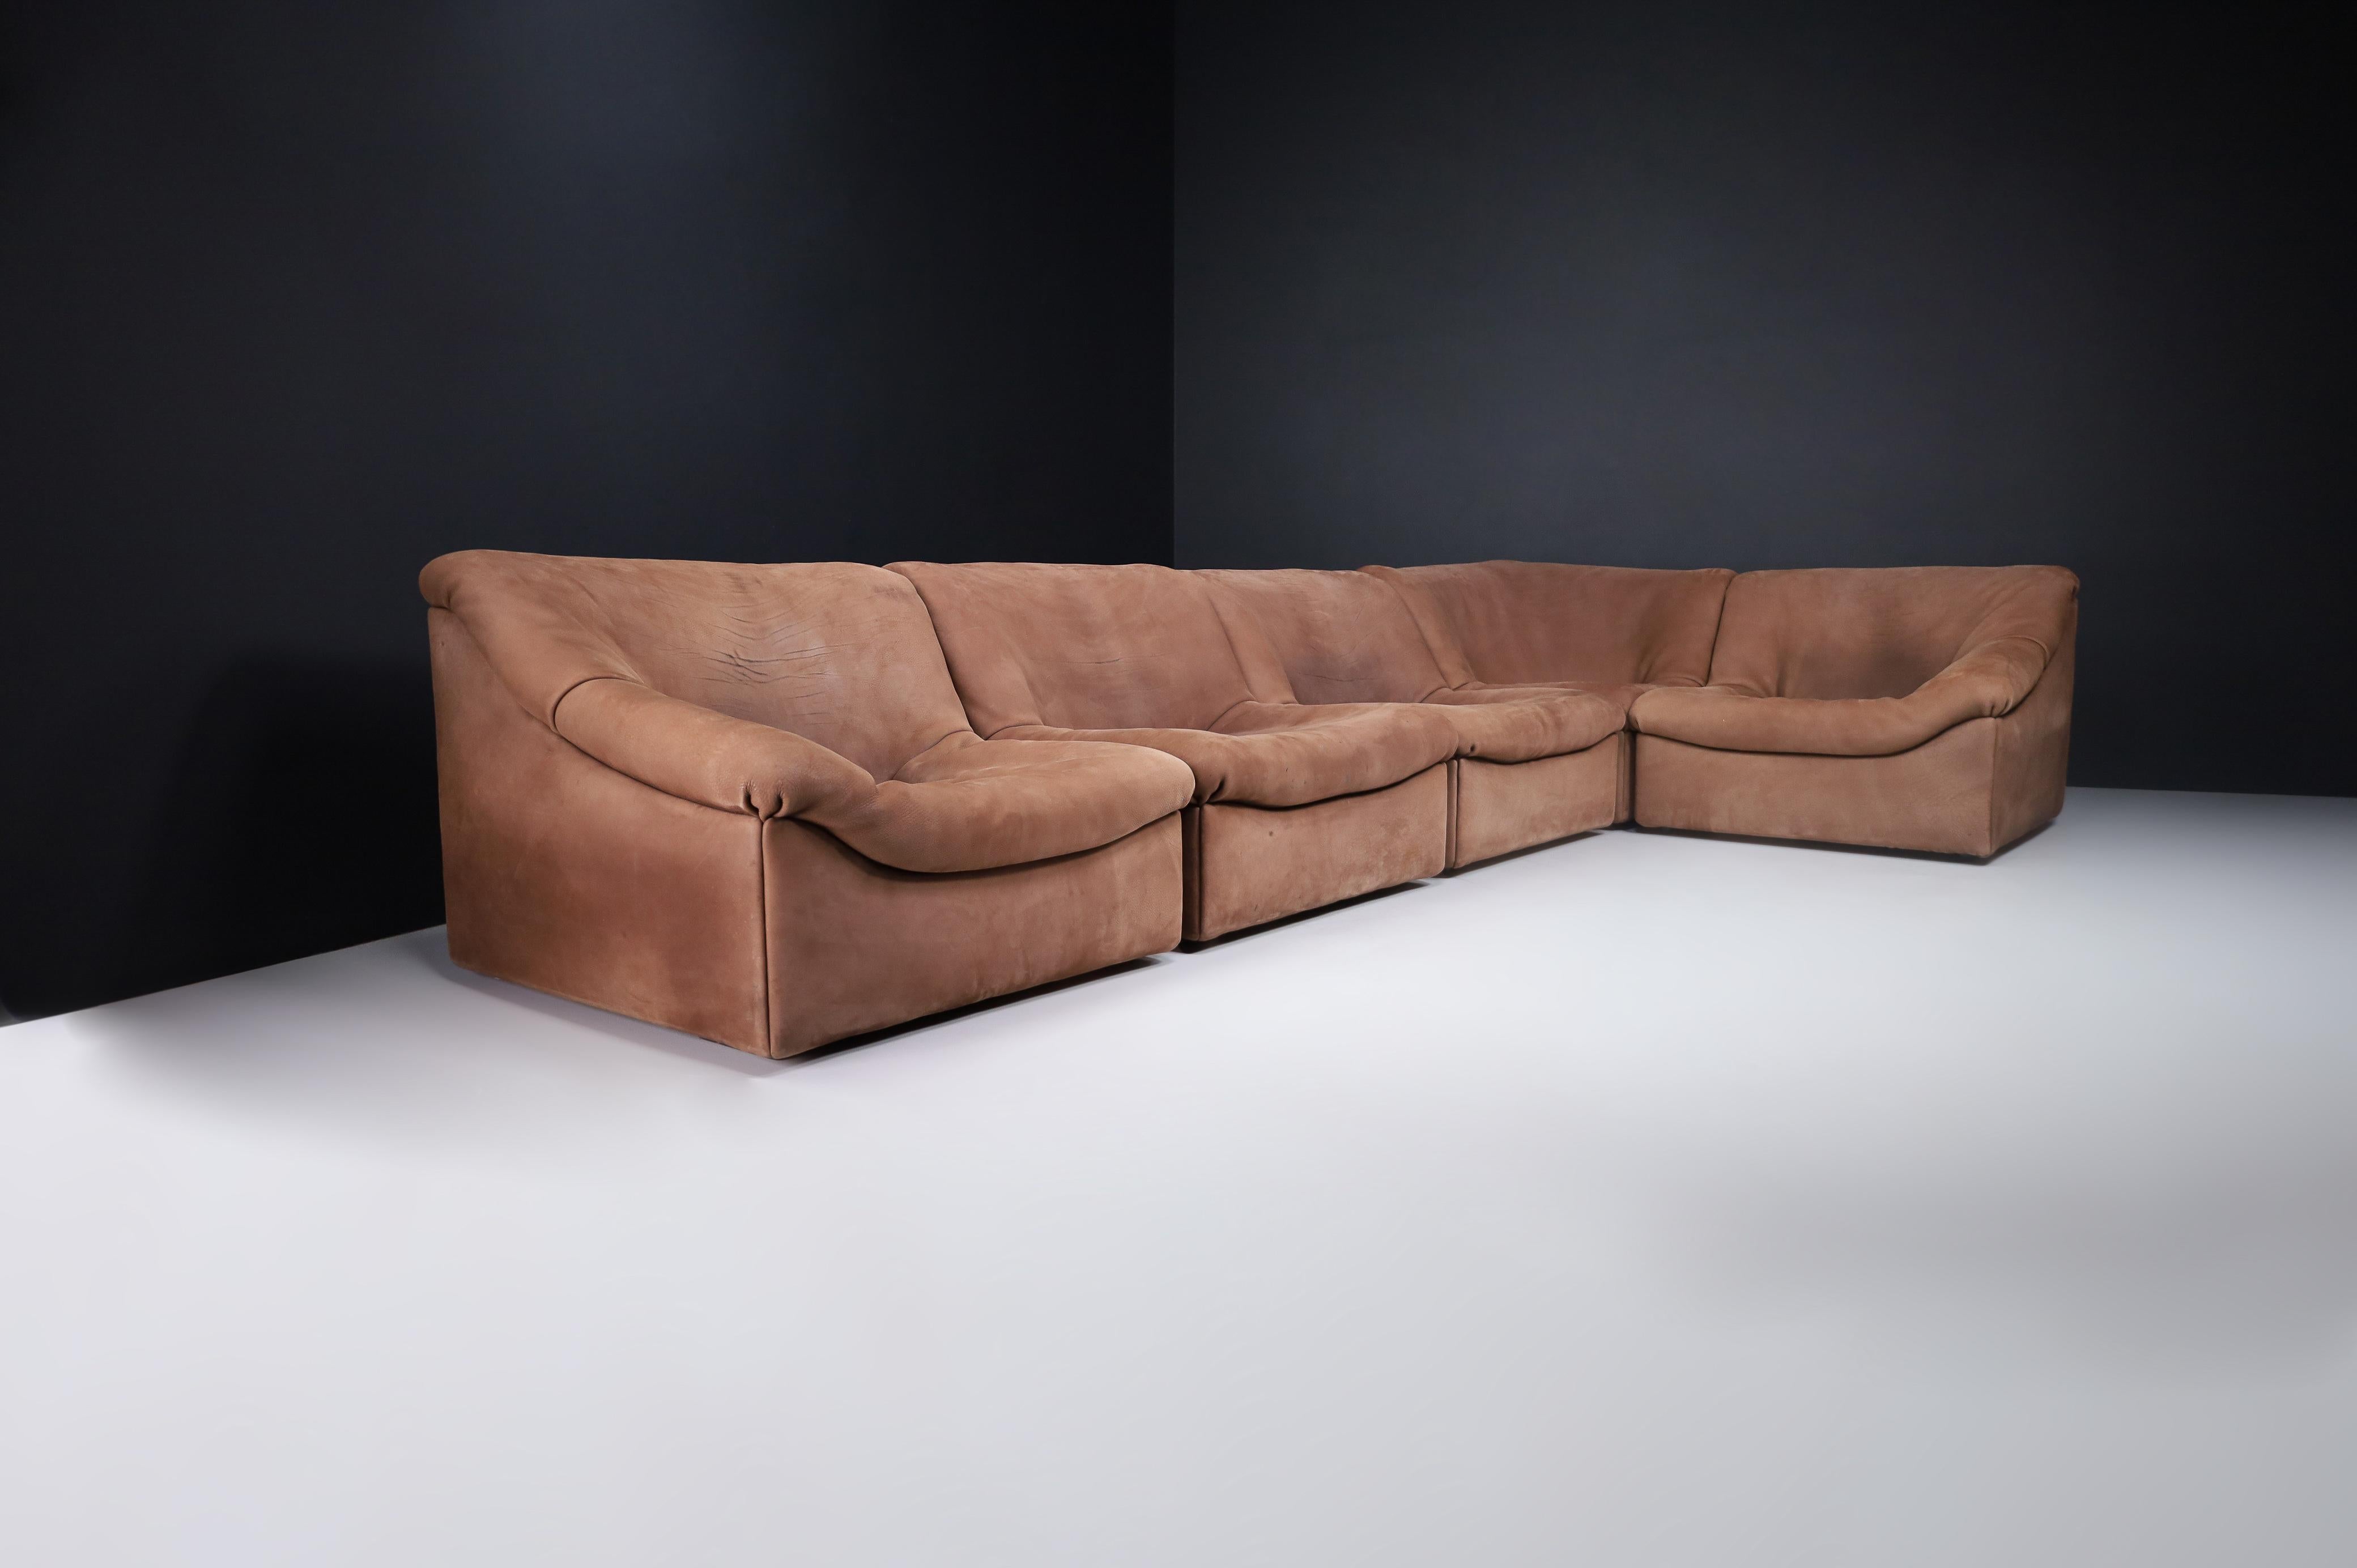 20th Century De Sede DS46 Sectional Sofa-Livingroomset in Buffalo Leather, Switzerland 1970s